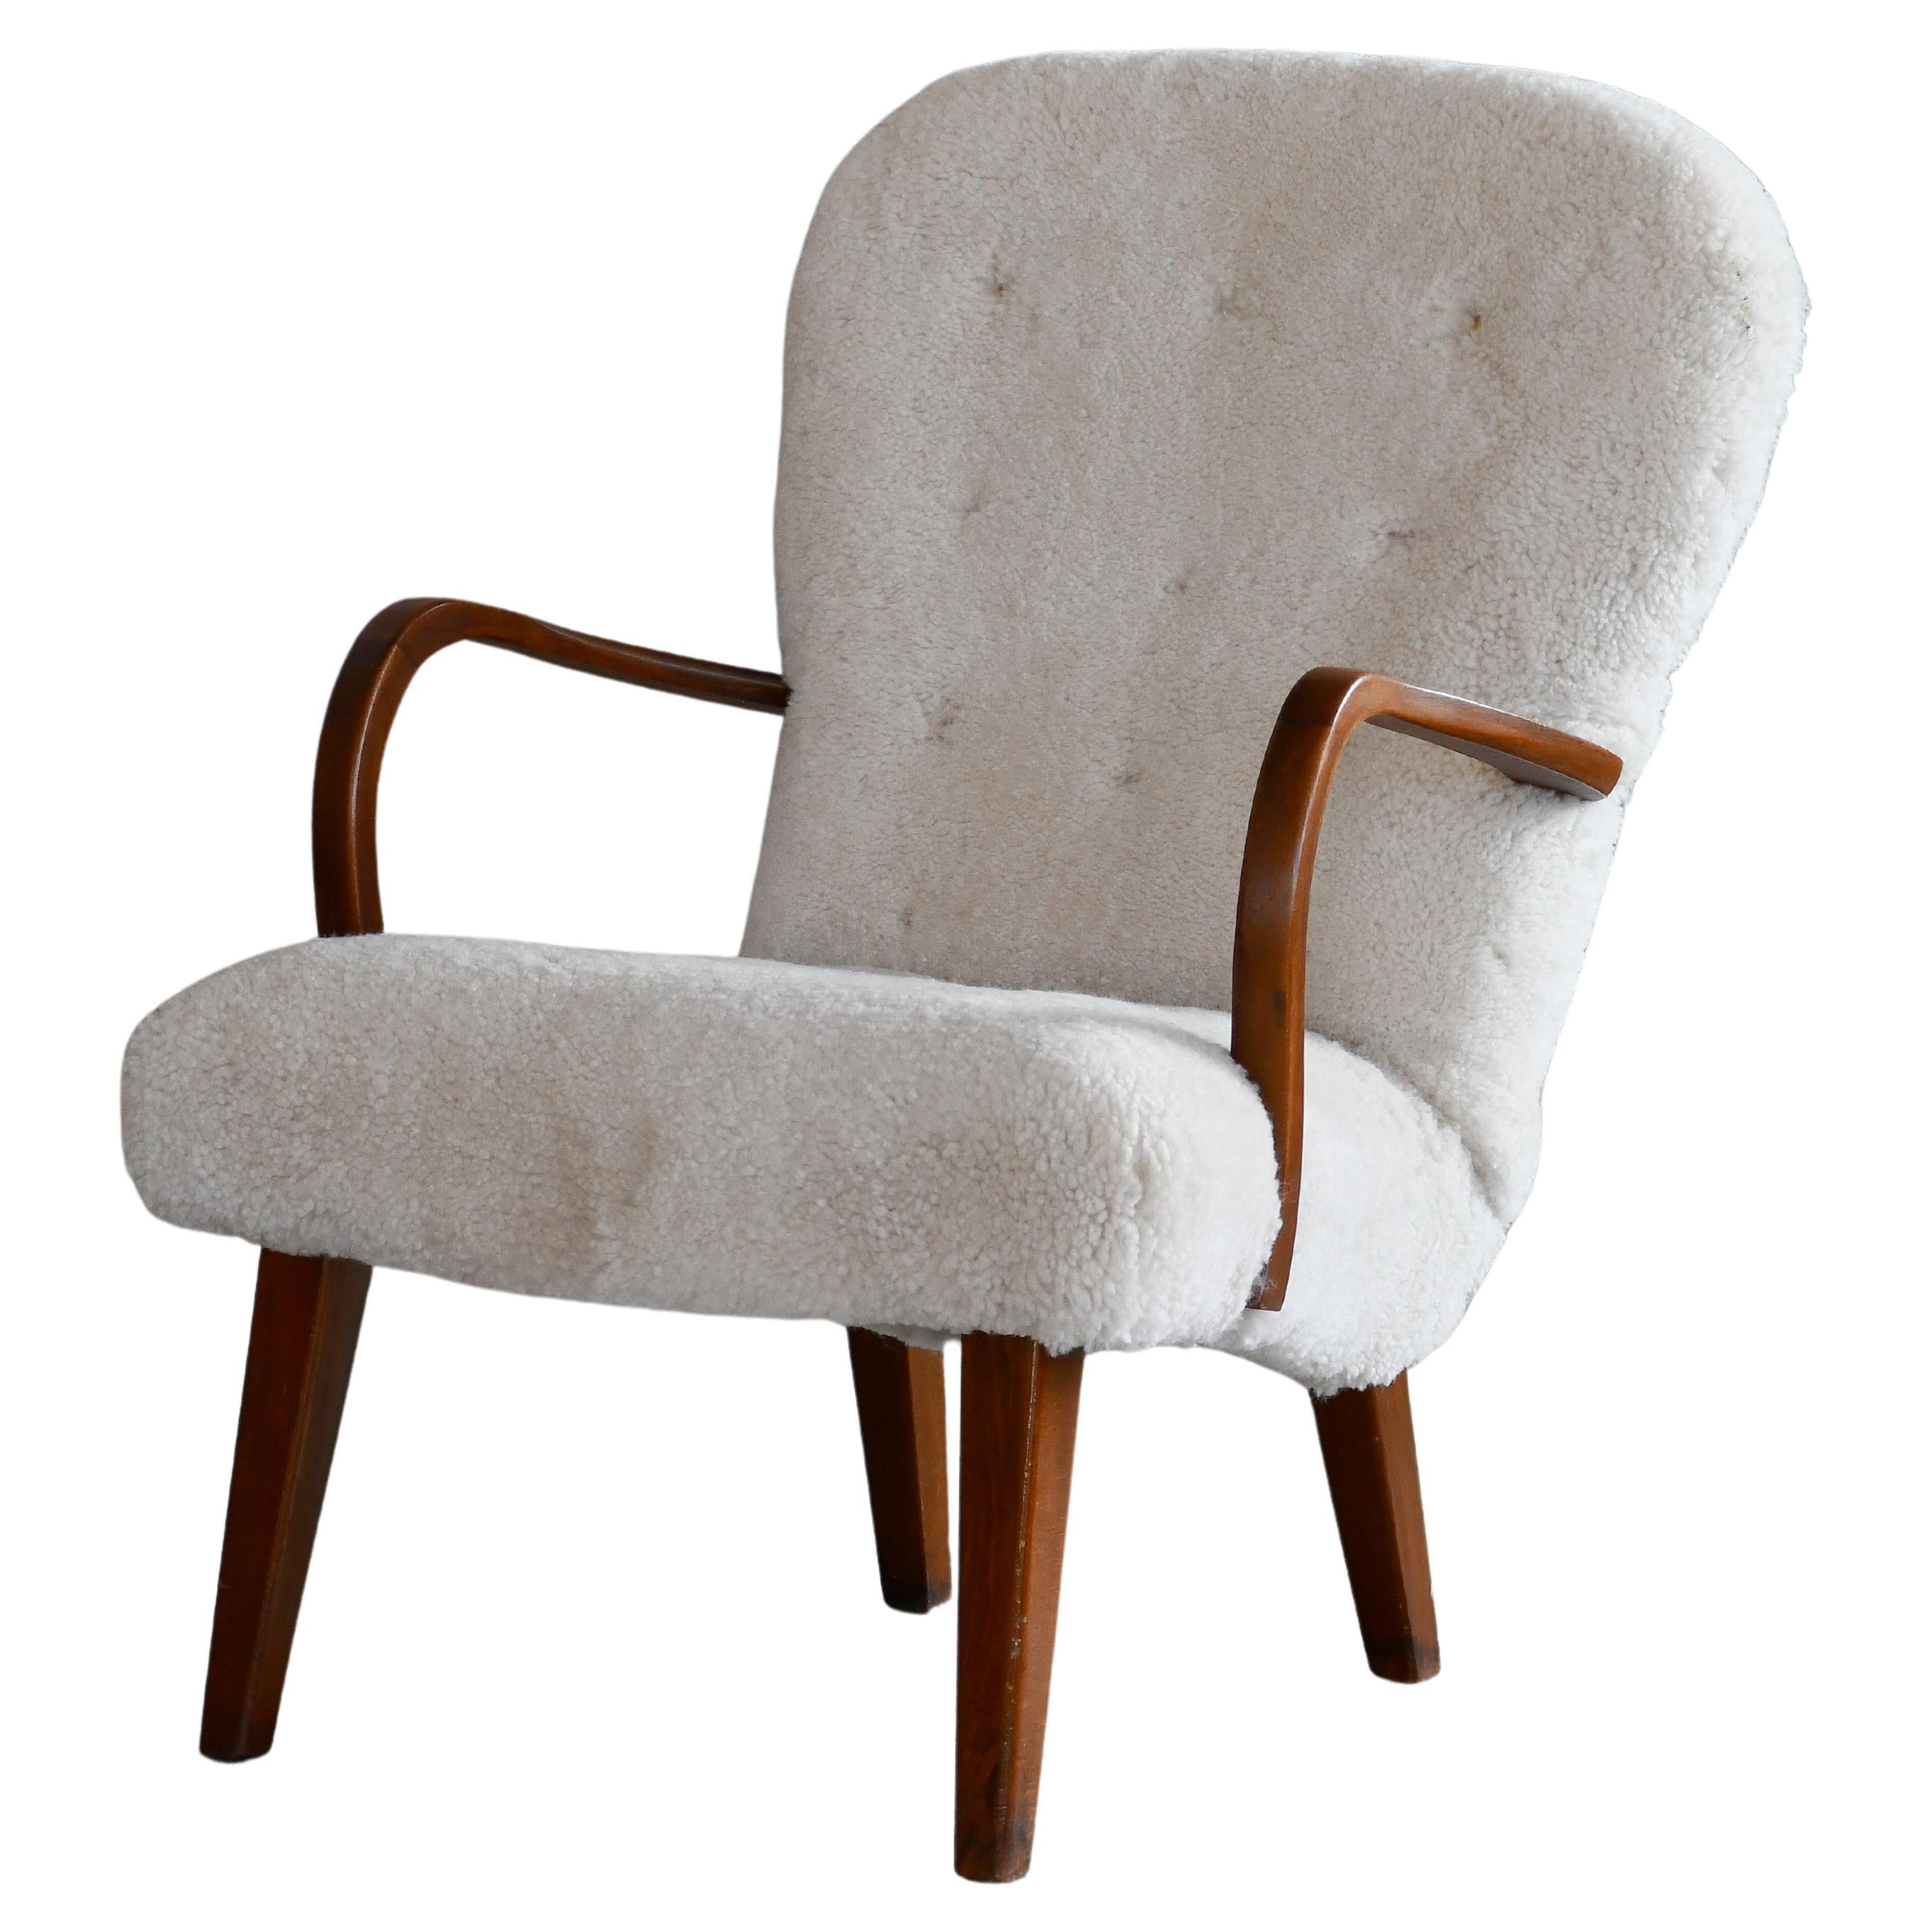 Midcentury Danish Clam Style Lounge Chair in Luxurious Sheepskin, 1950s For Sale